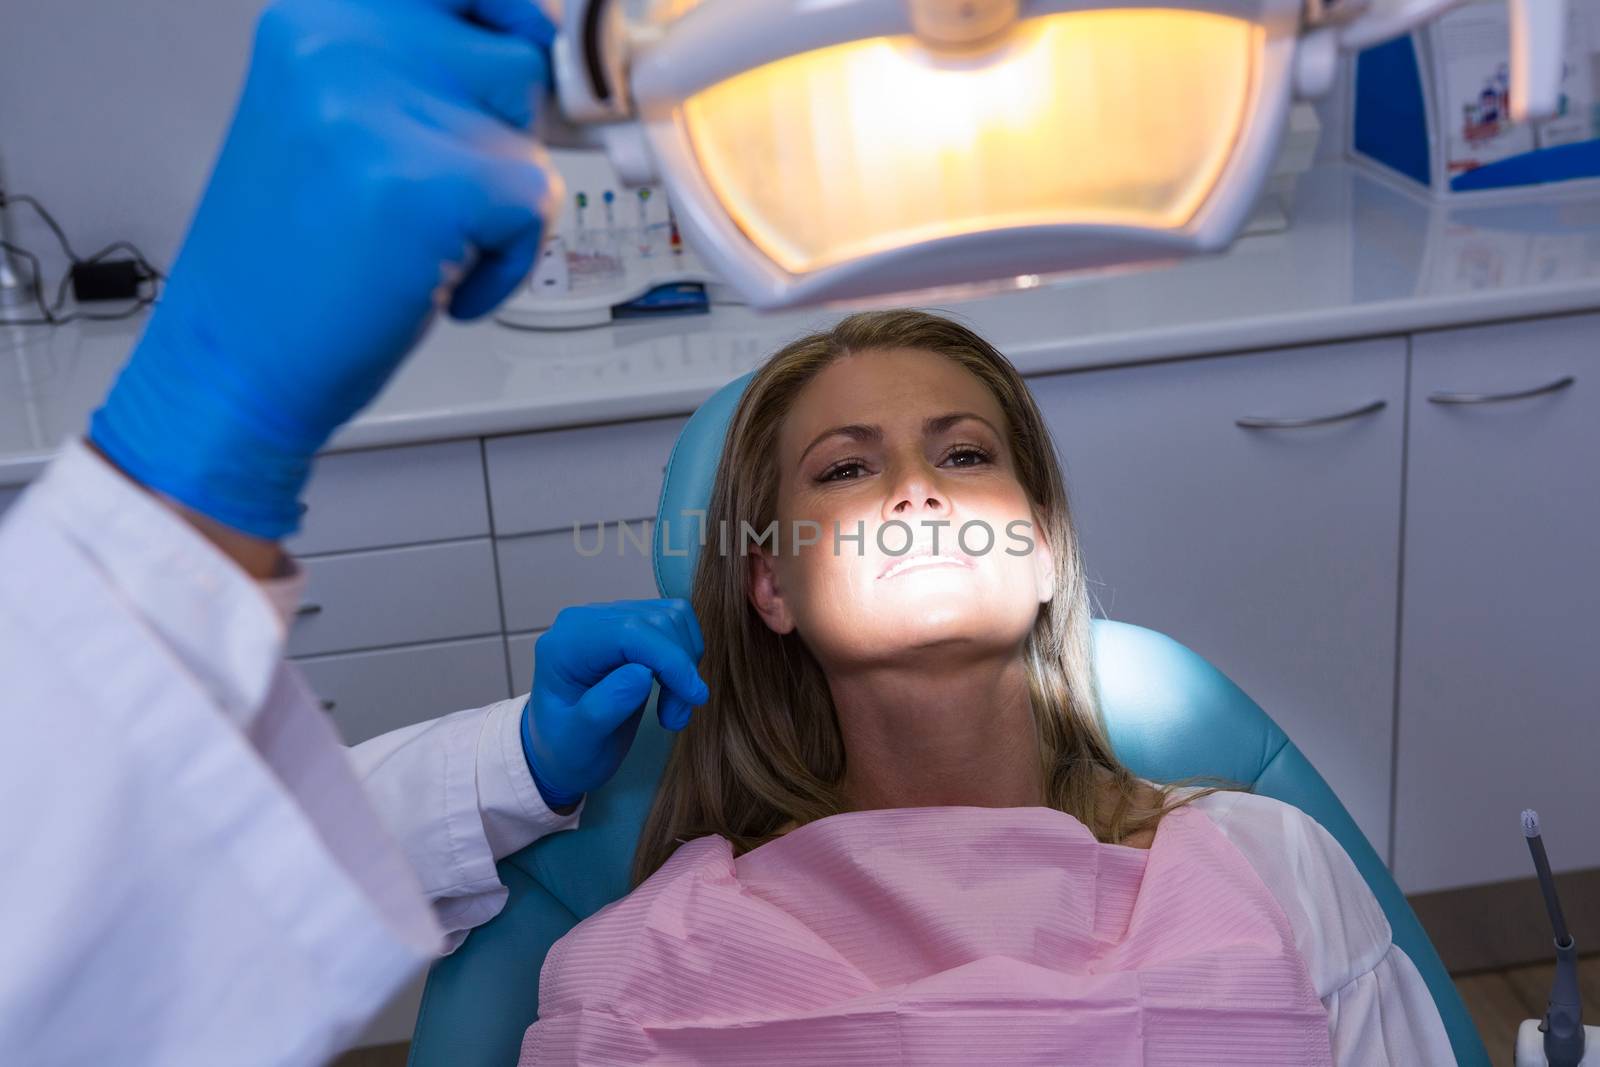 Woman lying on dentist chair while dentist adjusting electric lamp by Wavebreakmedia